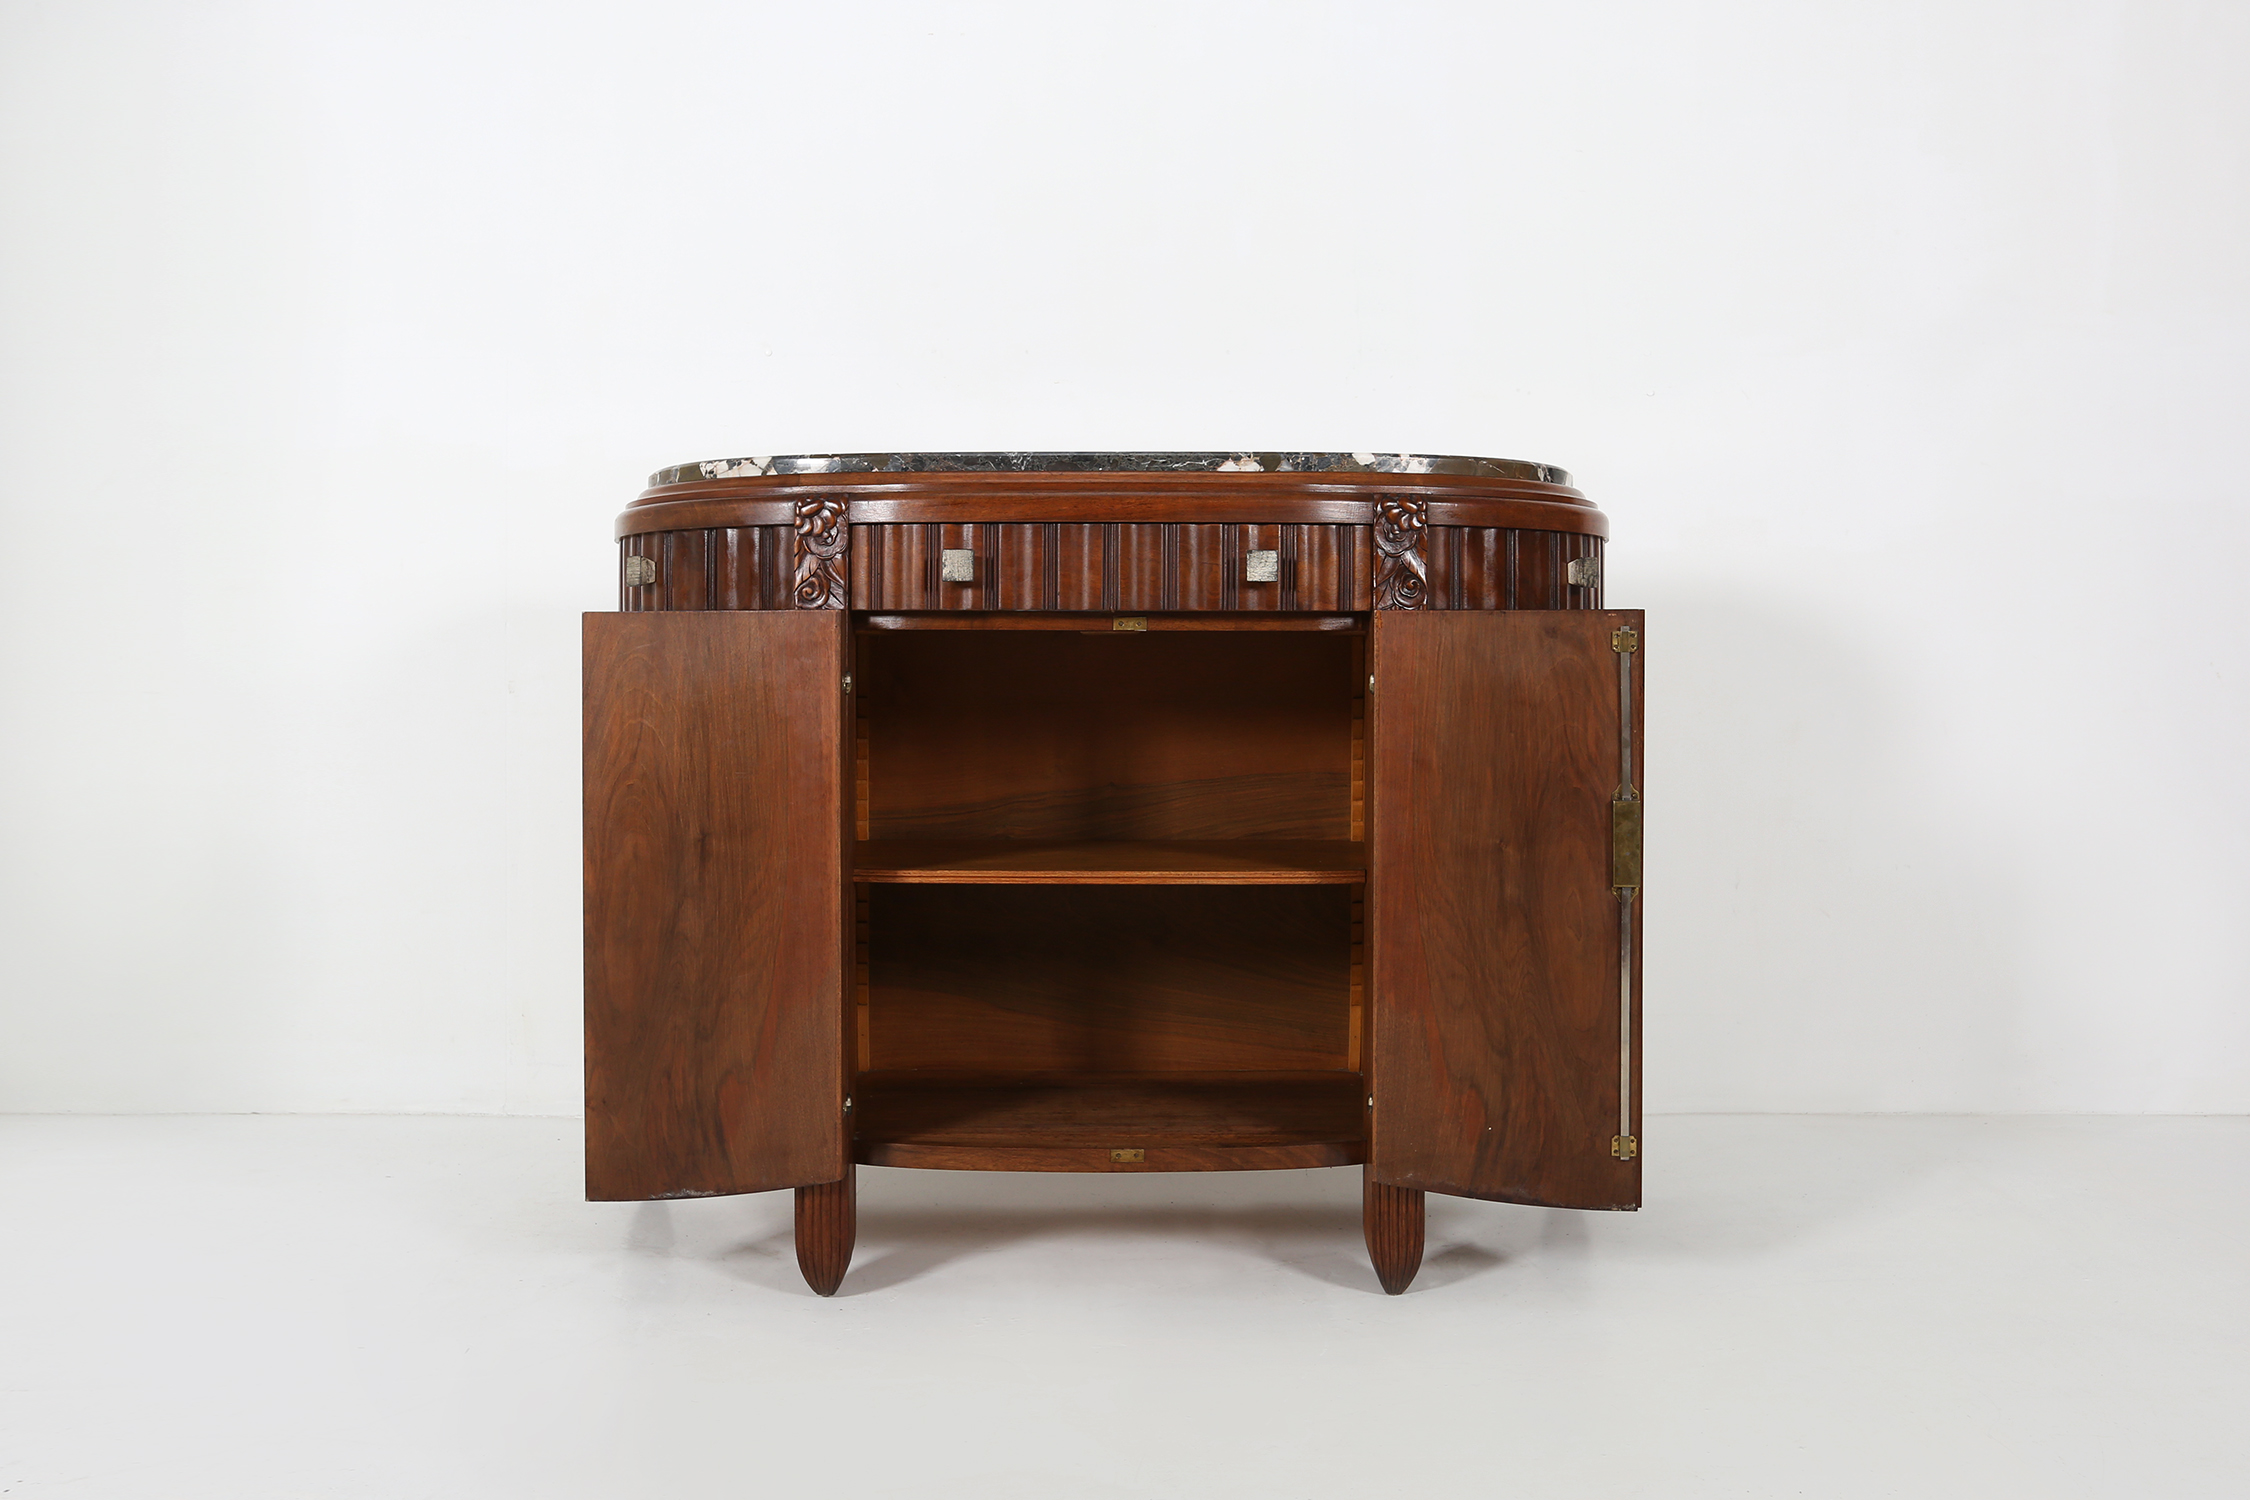 Cabinet attributed to Léon Jallotthumbnail